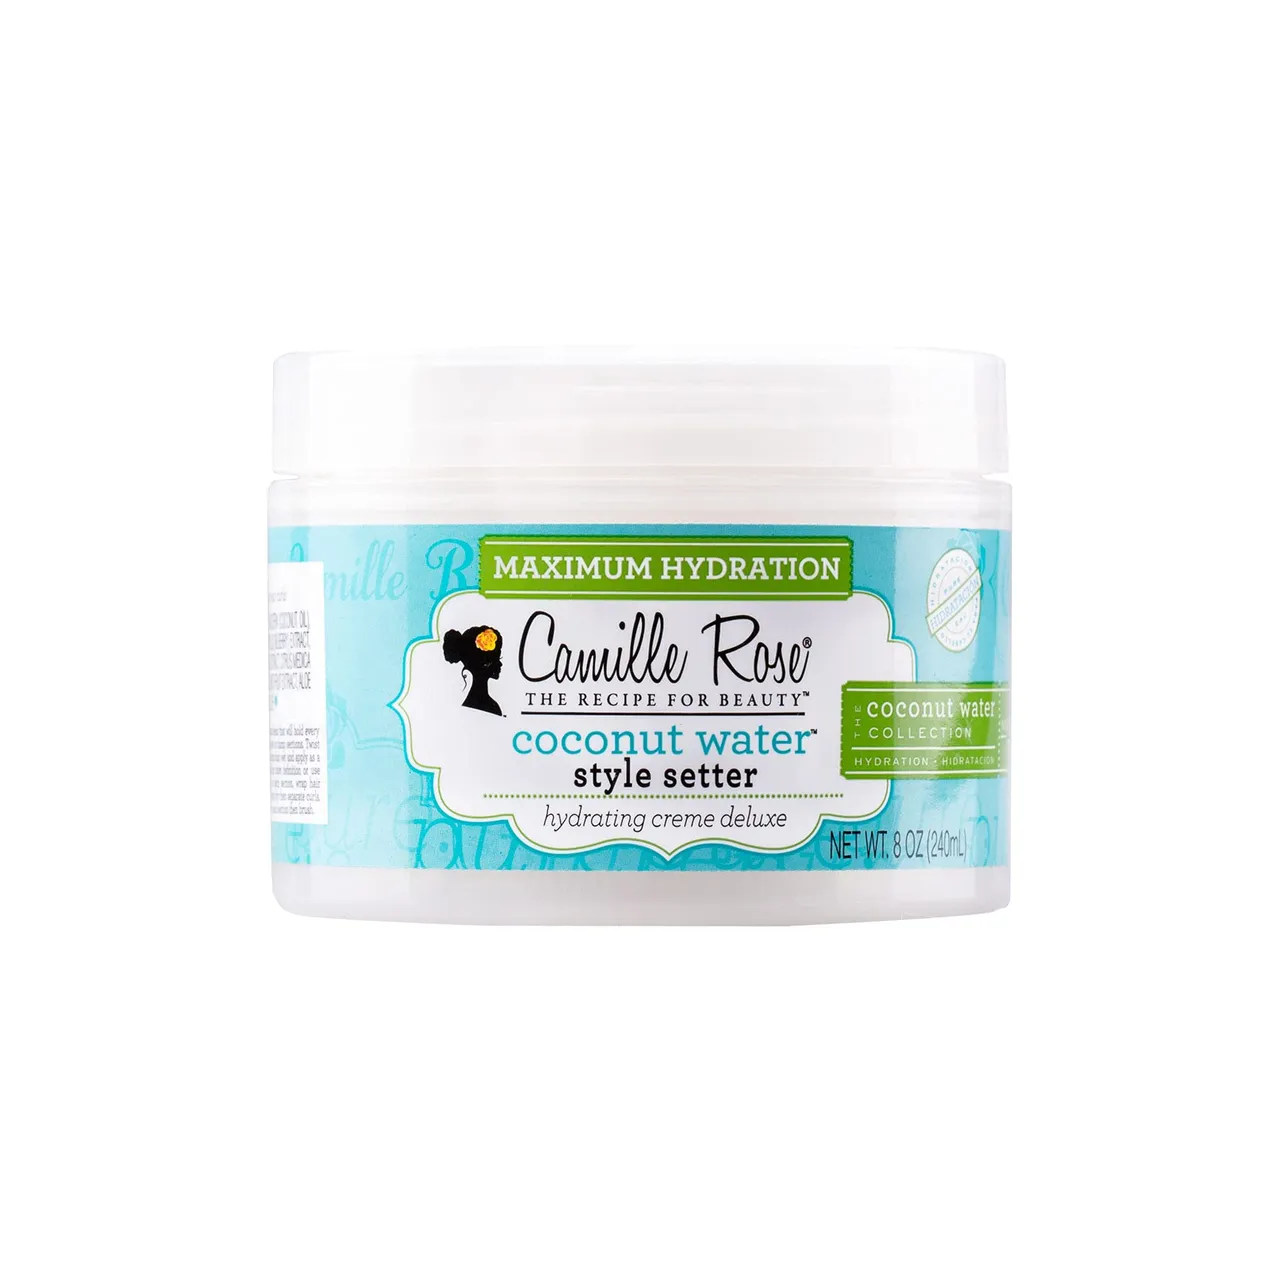 Camille Rose Coconut Water Hair Style Setter